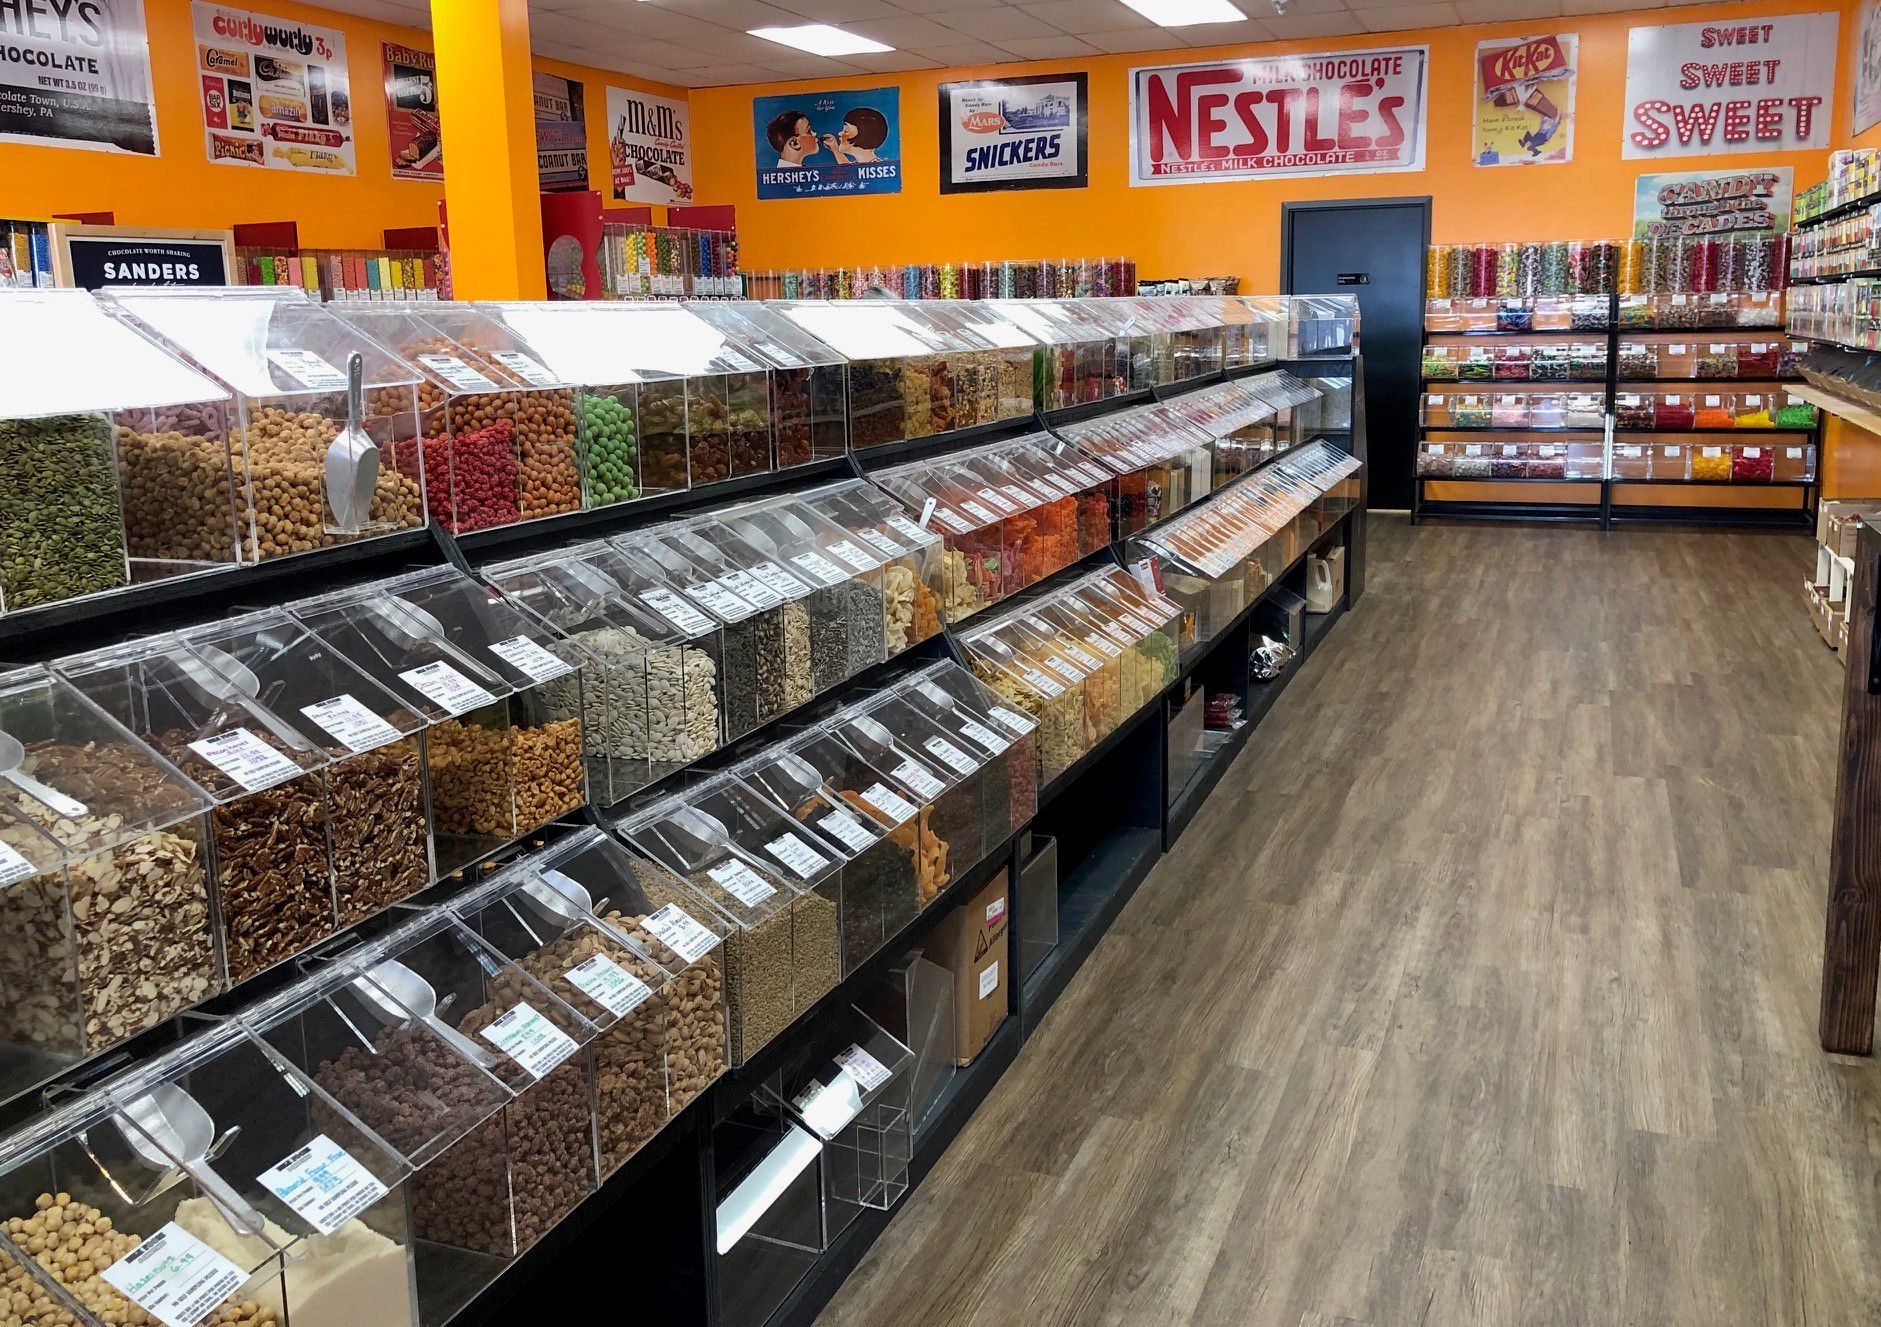 Bulk food wonderland opens in Livonia with a staggering amount of